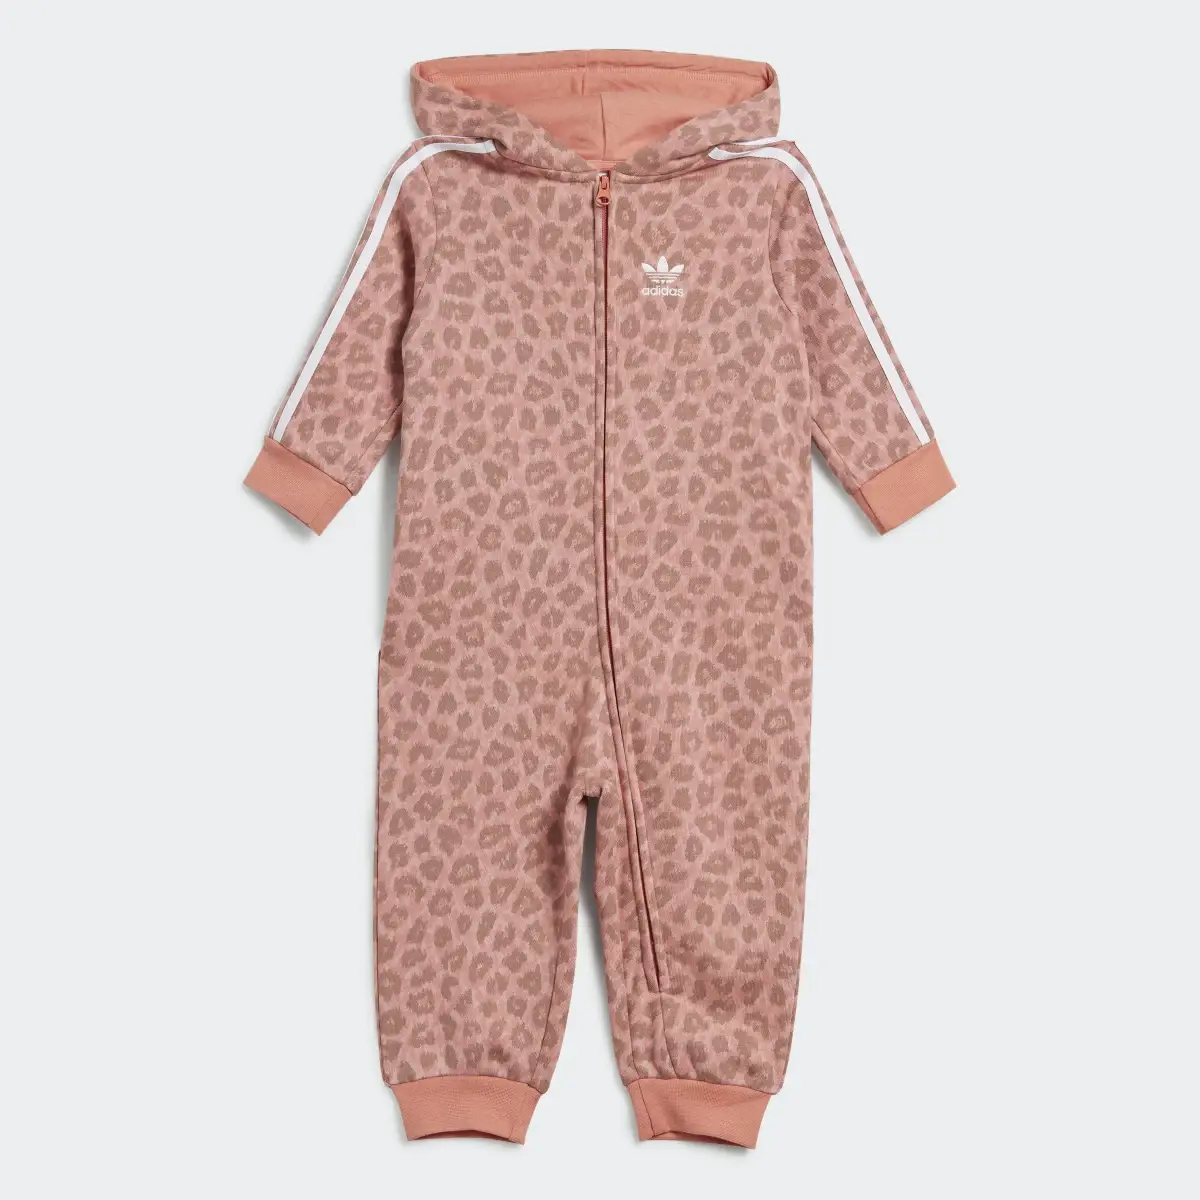 Adidas Animal Allover Print Hooded Bodysuit with Ears. 1